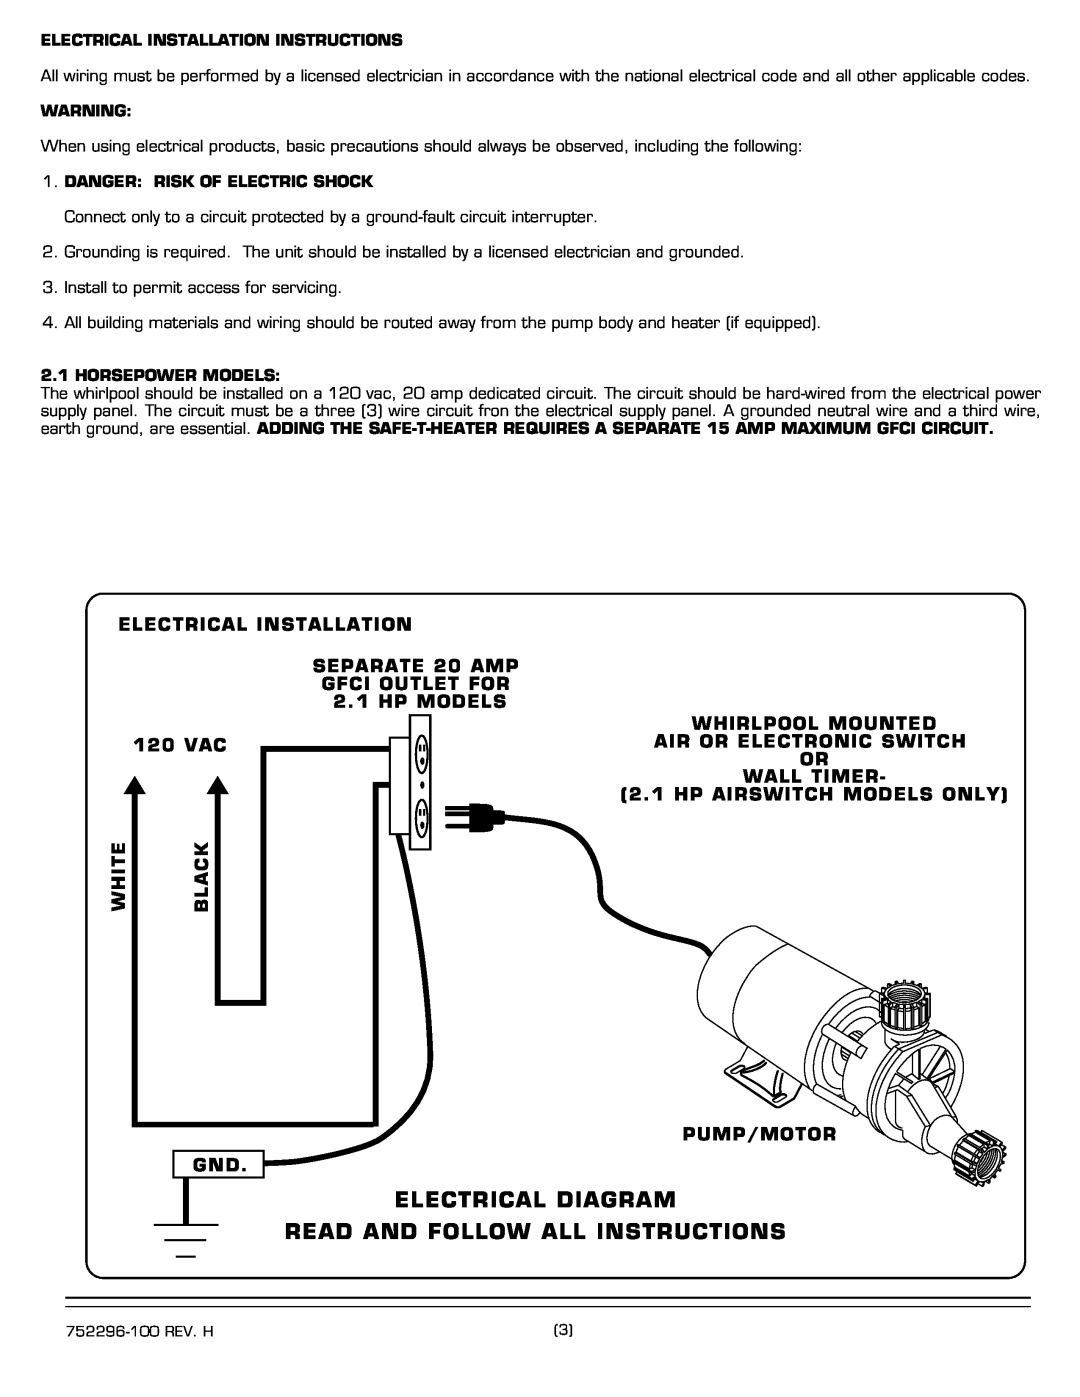 American Standard 2711.XXXW Electrical Diagram Read And Follow All Instructions, 120 VAC, White, Black, Horsepower Models 